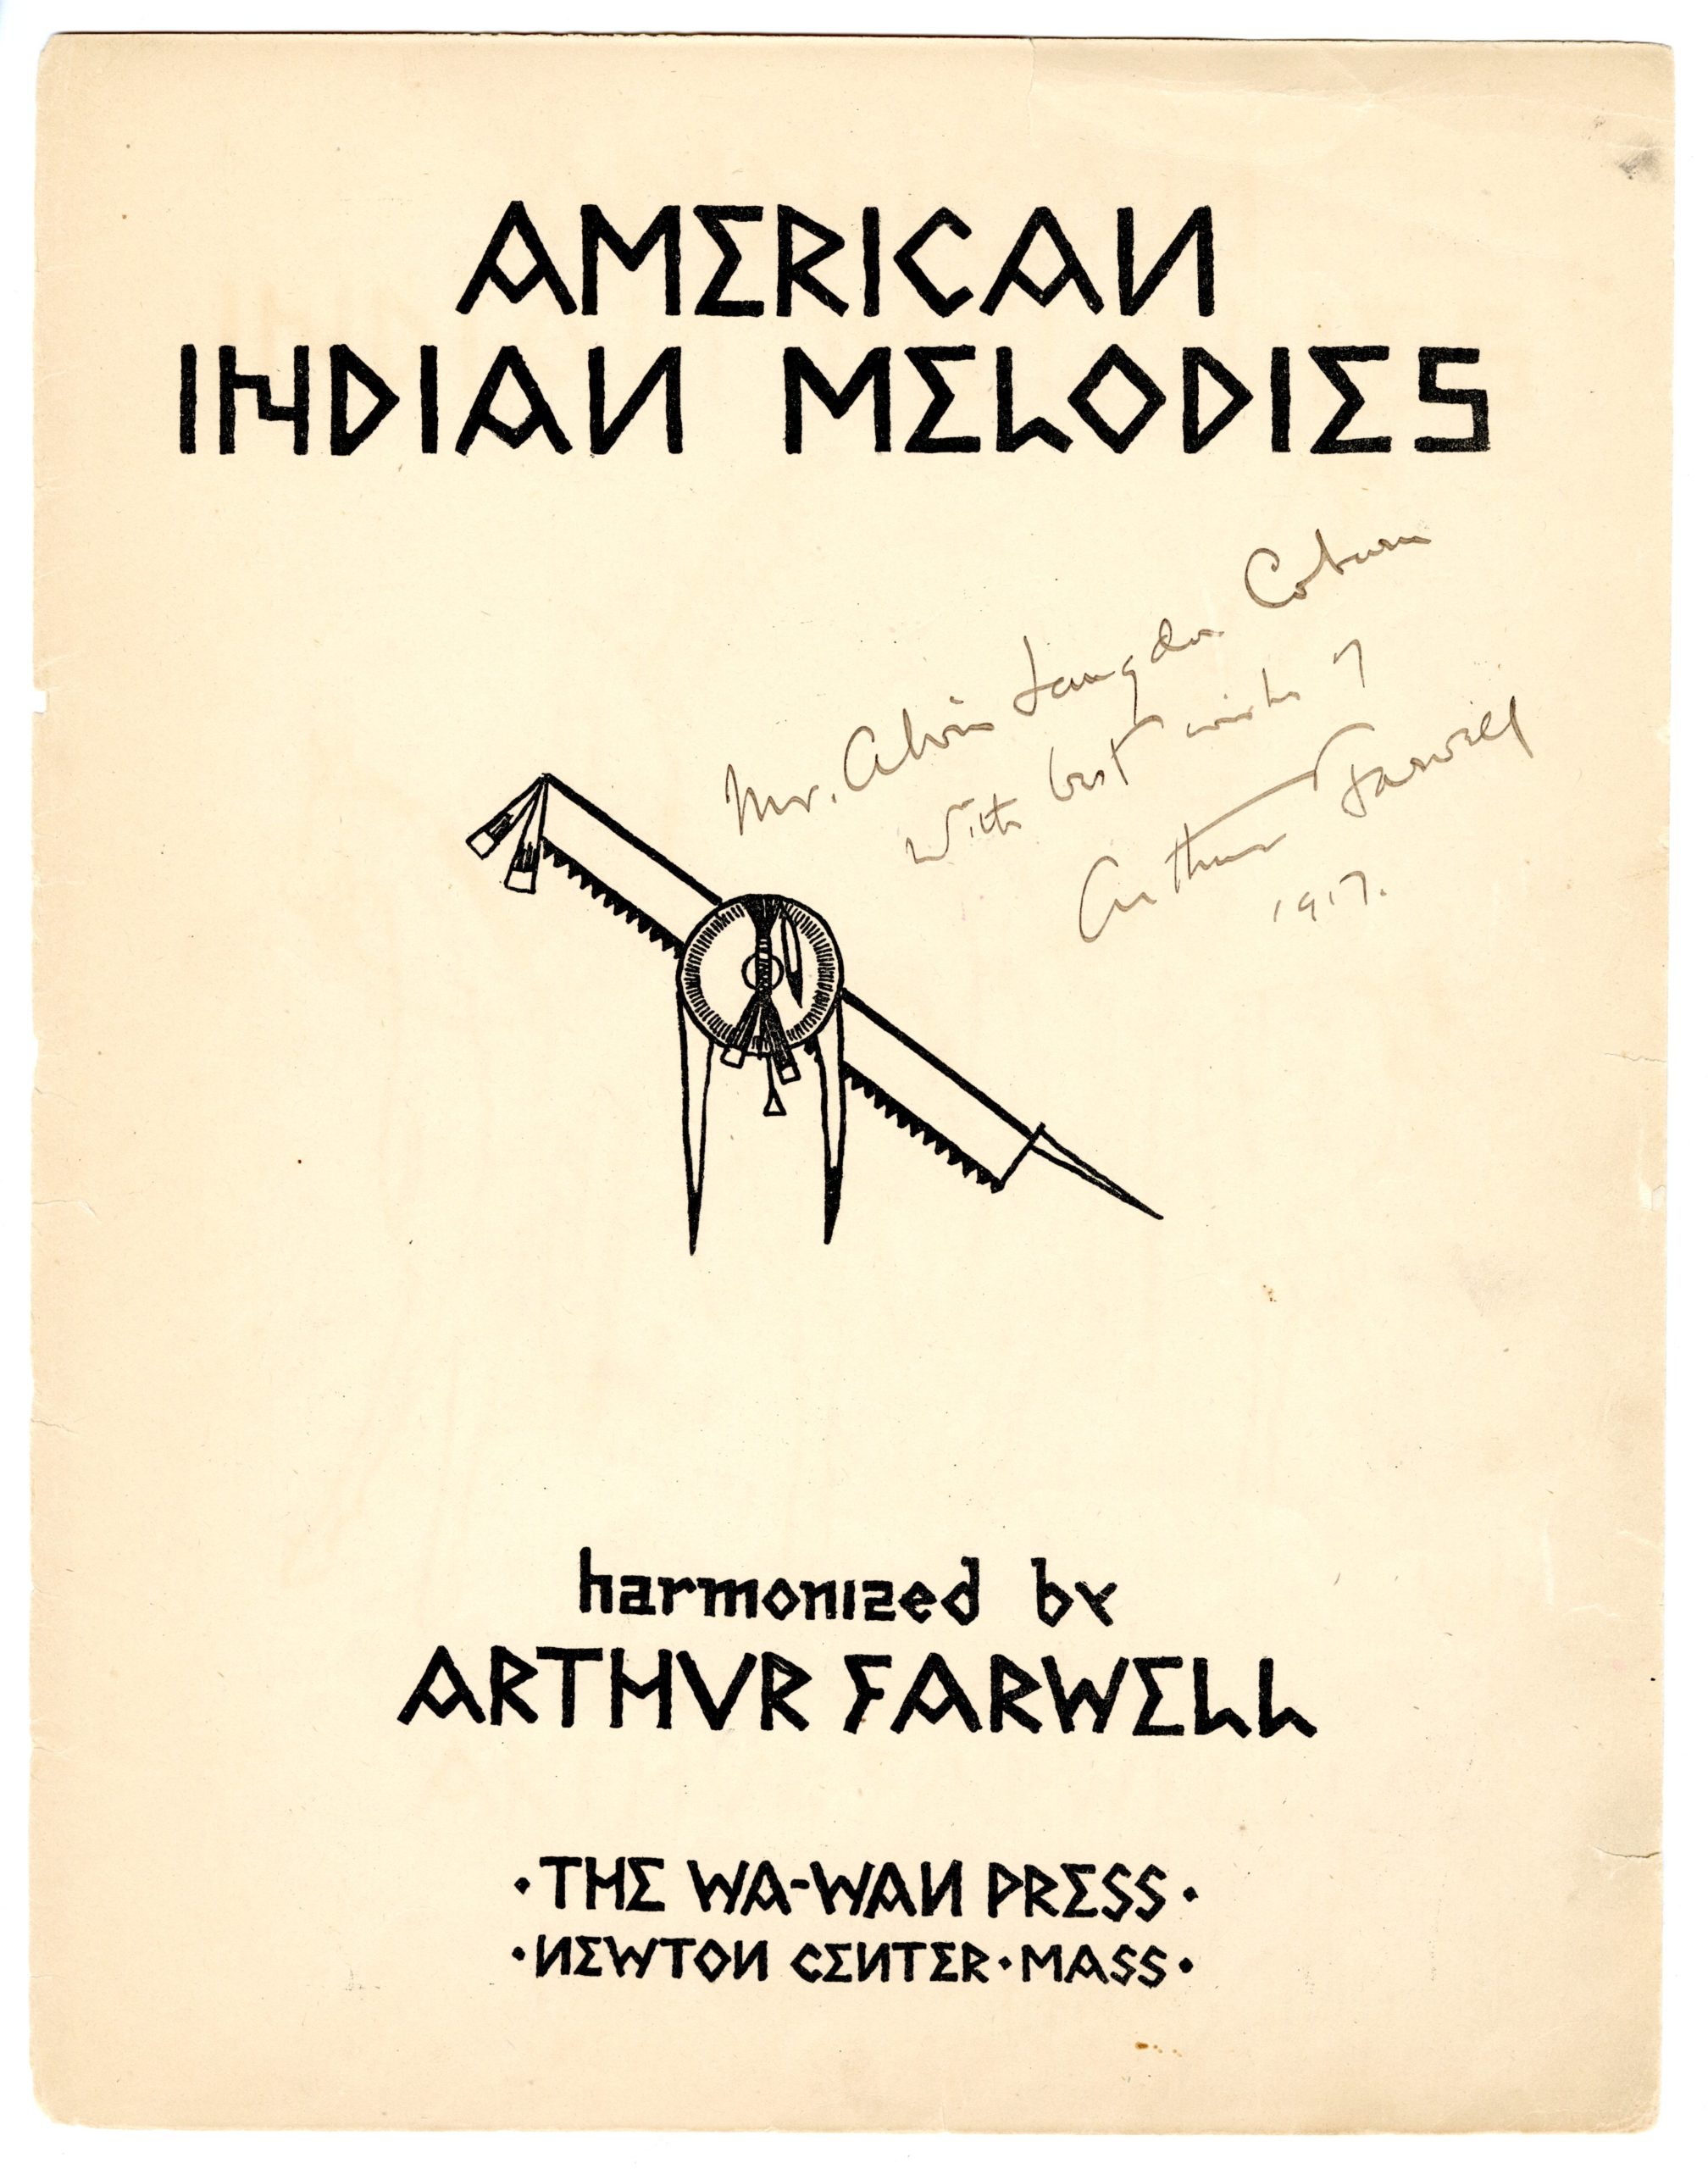 American Indian Melodies, title page with handwritten inscription by Farwell.